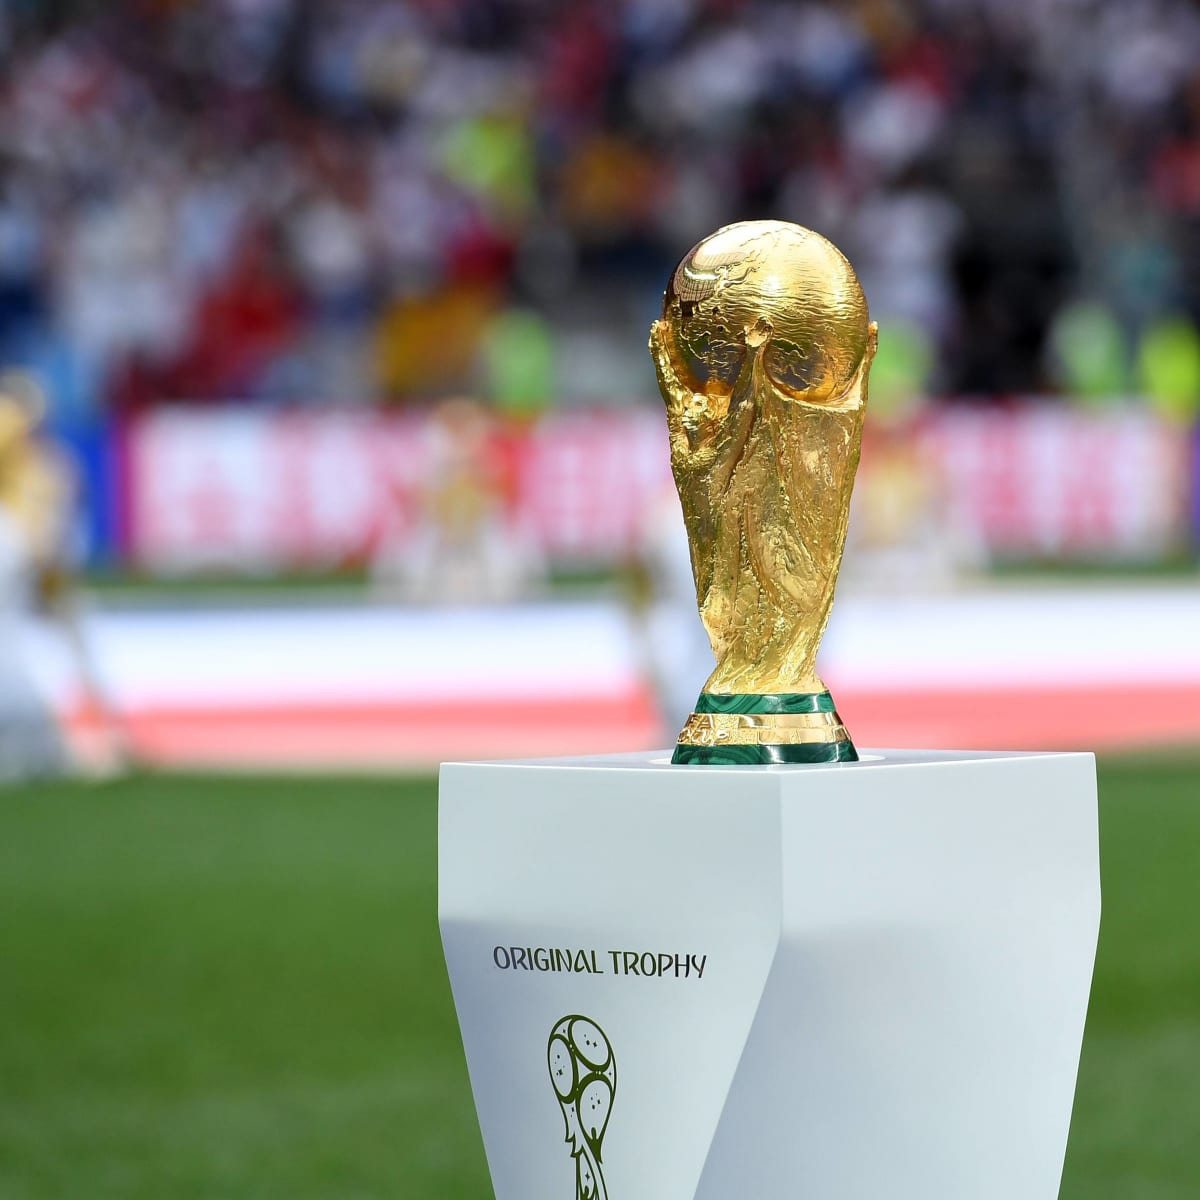 Update on African qualifiers for FIFA World Cup Qatar 2022(TM)